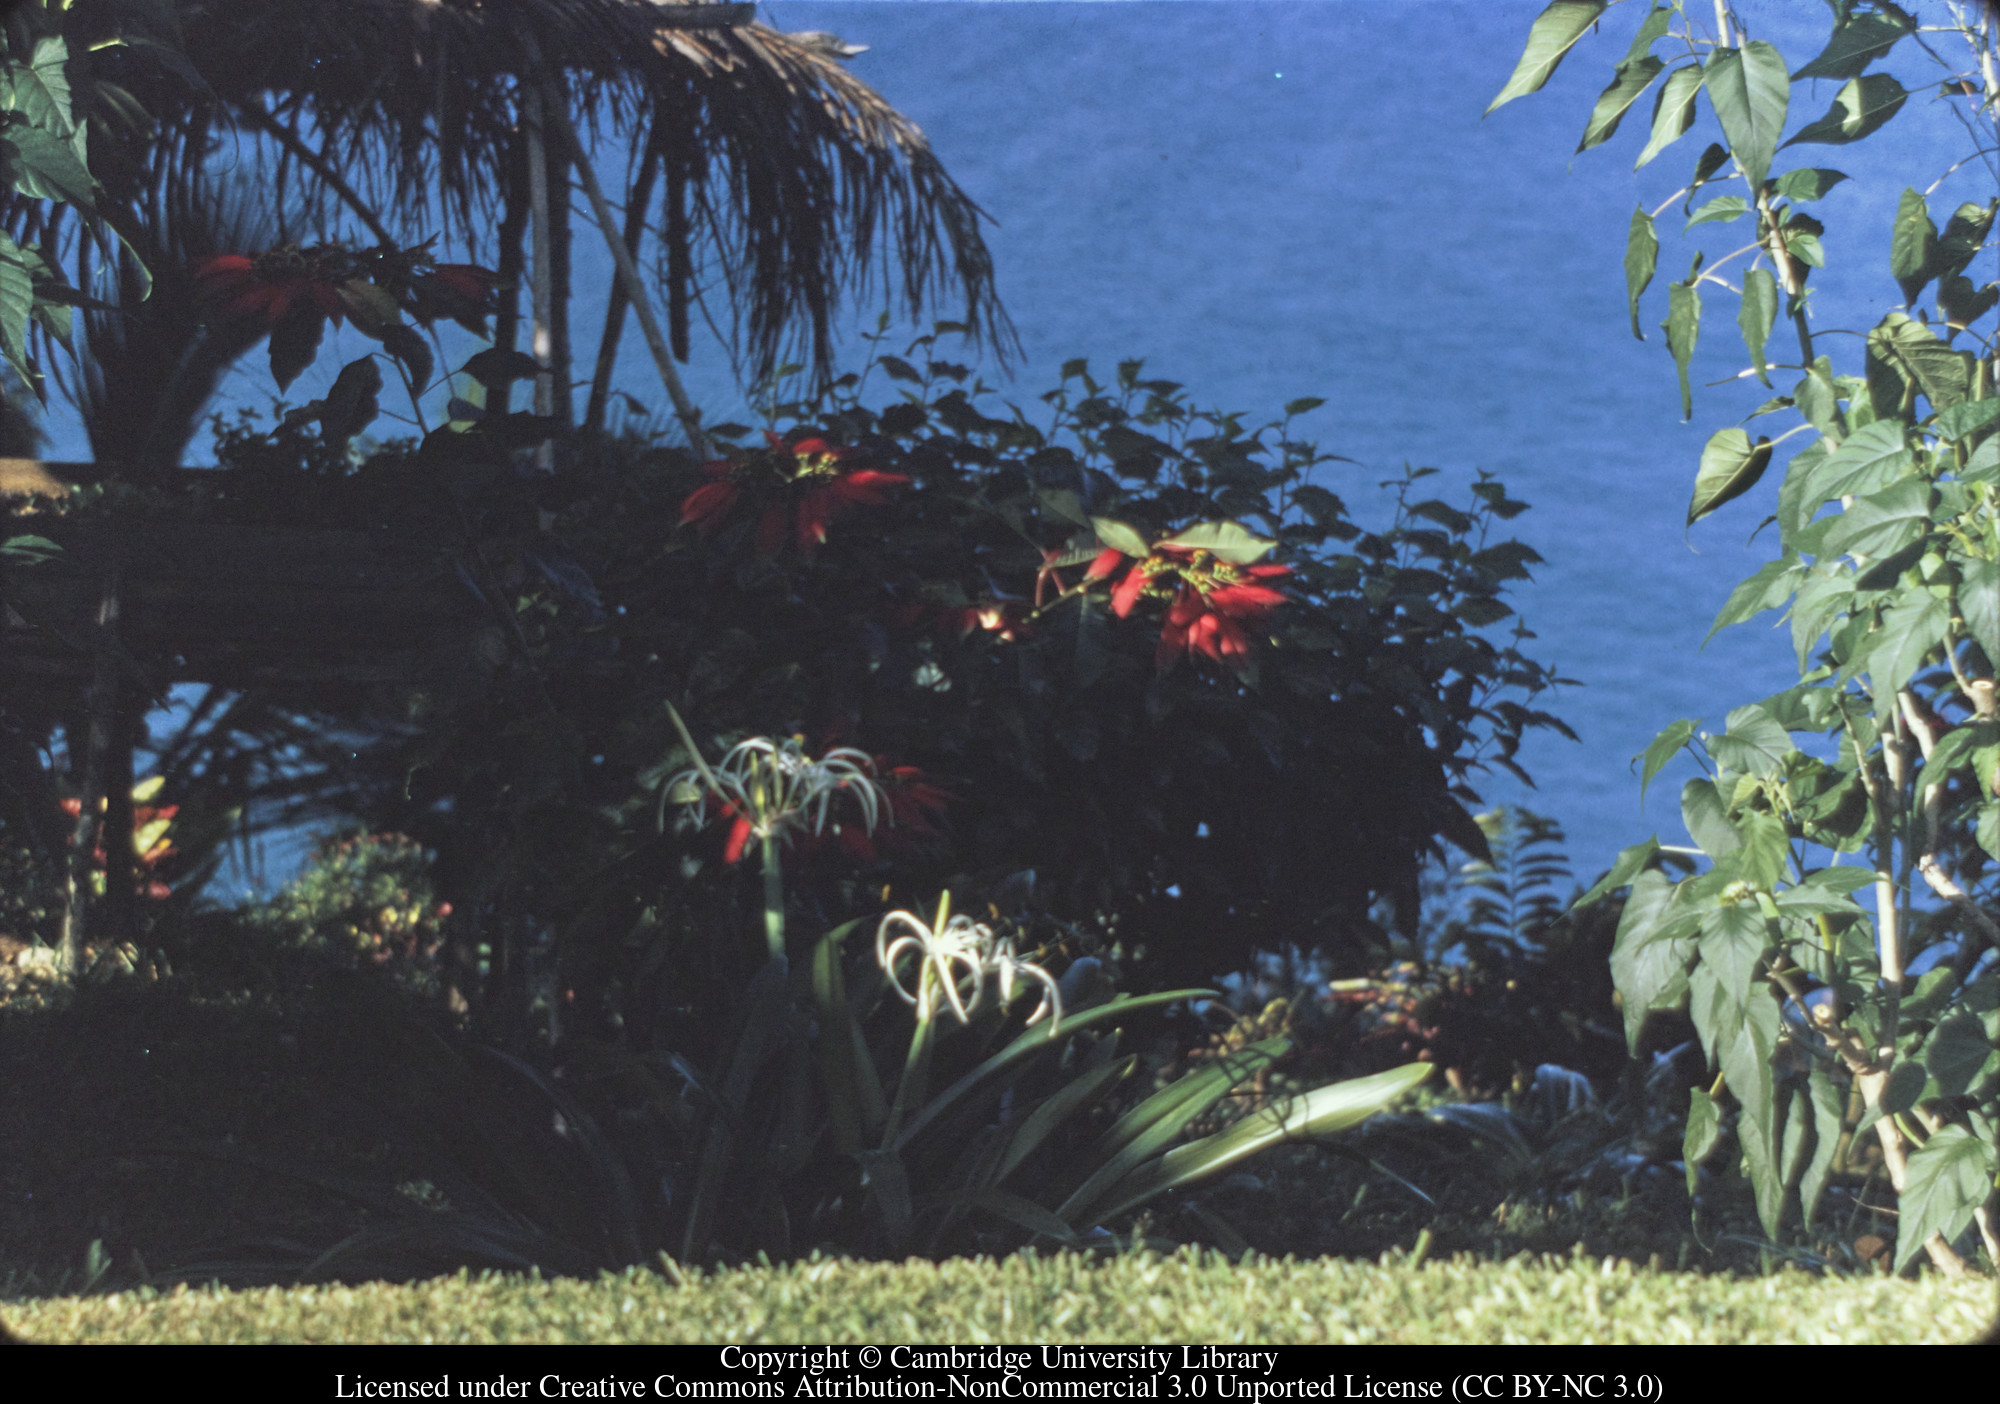 Spider Lily, poinsettia and sea, C [Ciceron] early morning, 1971-02